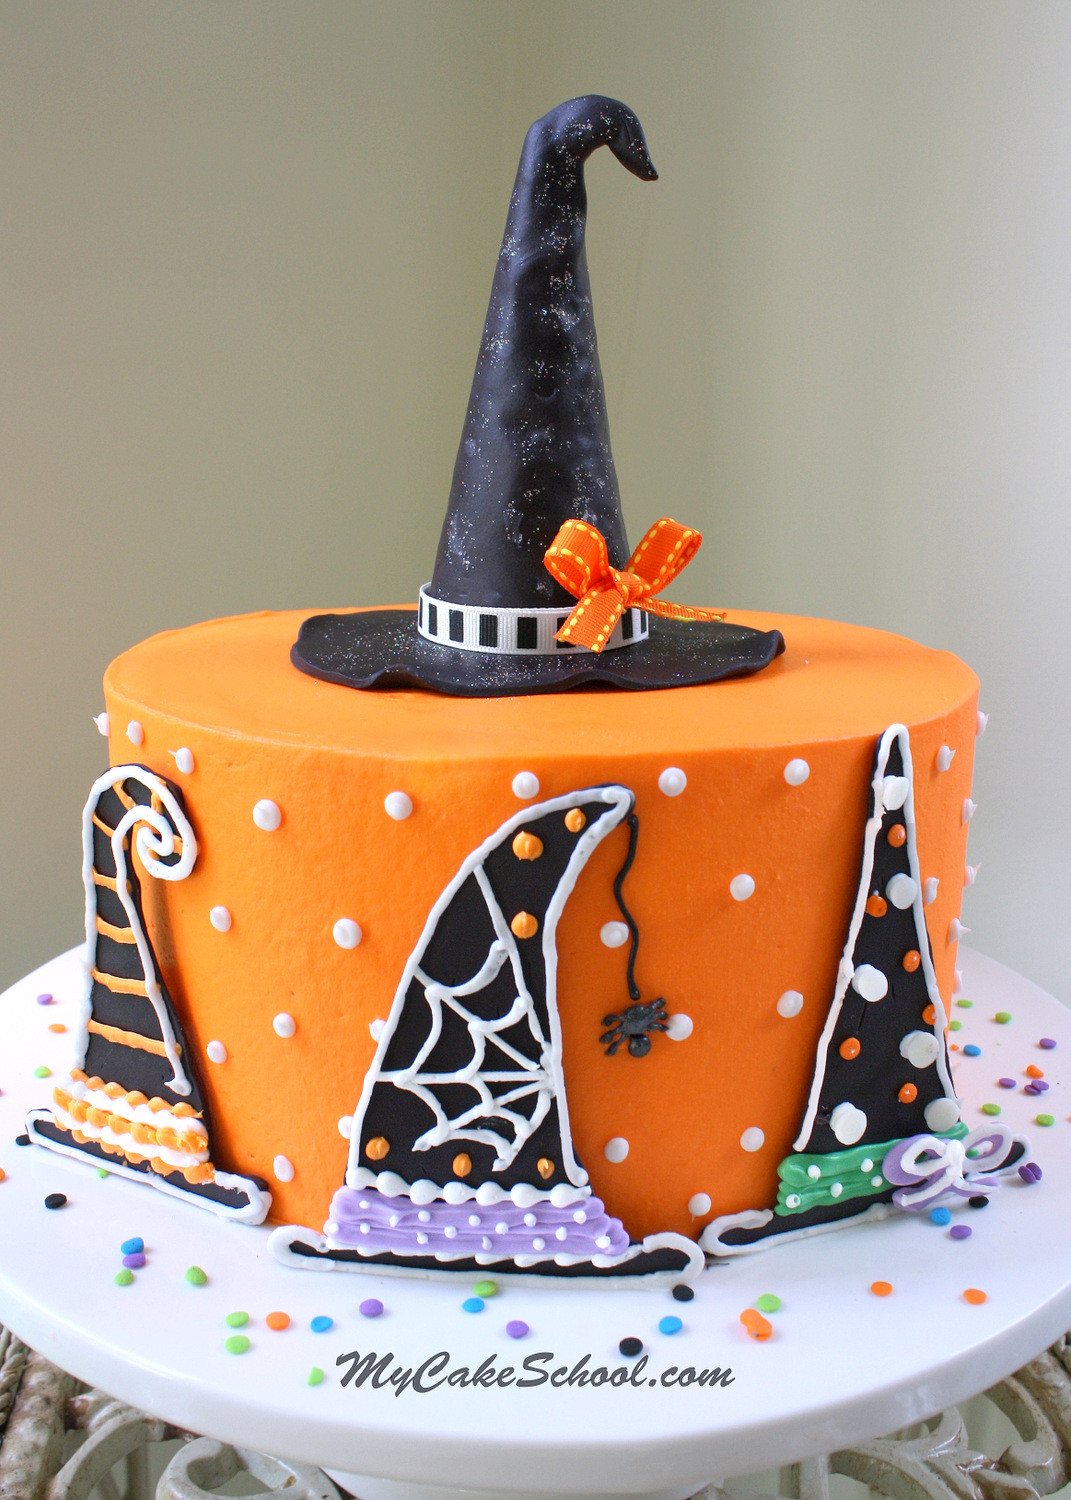 Images Of Halloween Cakes
 Witch Hats A Halloween Cake Decorating Tutorial